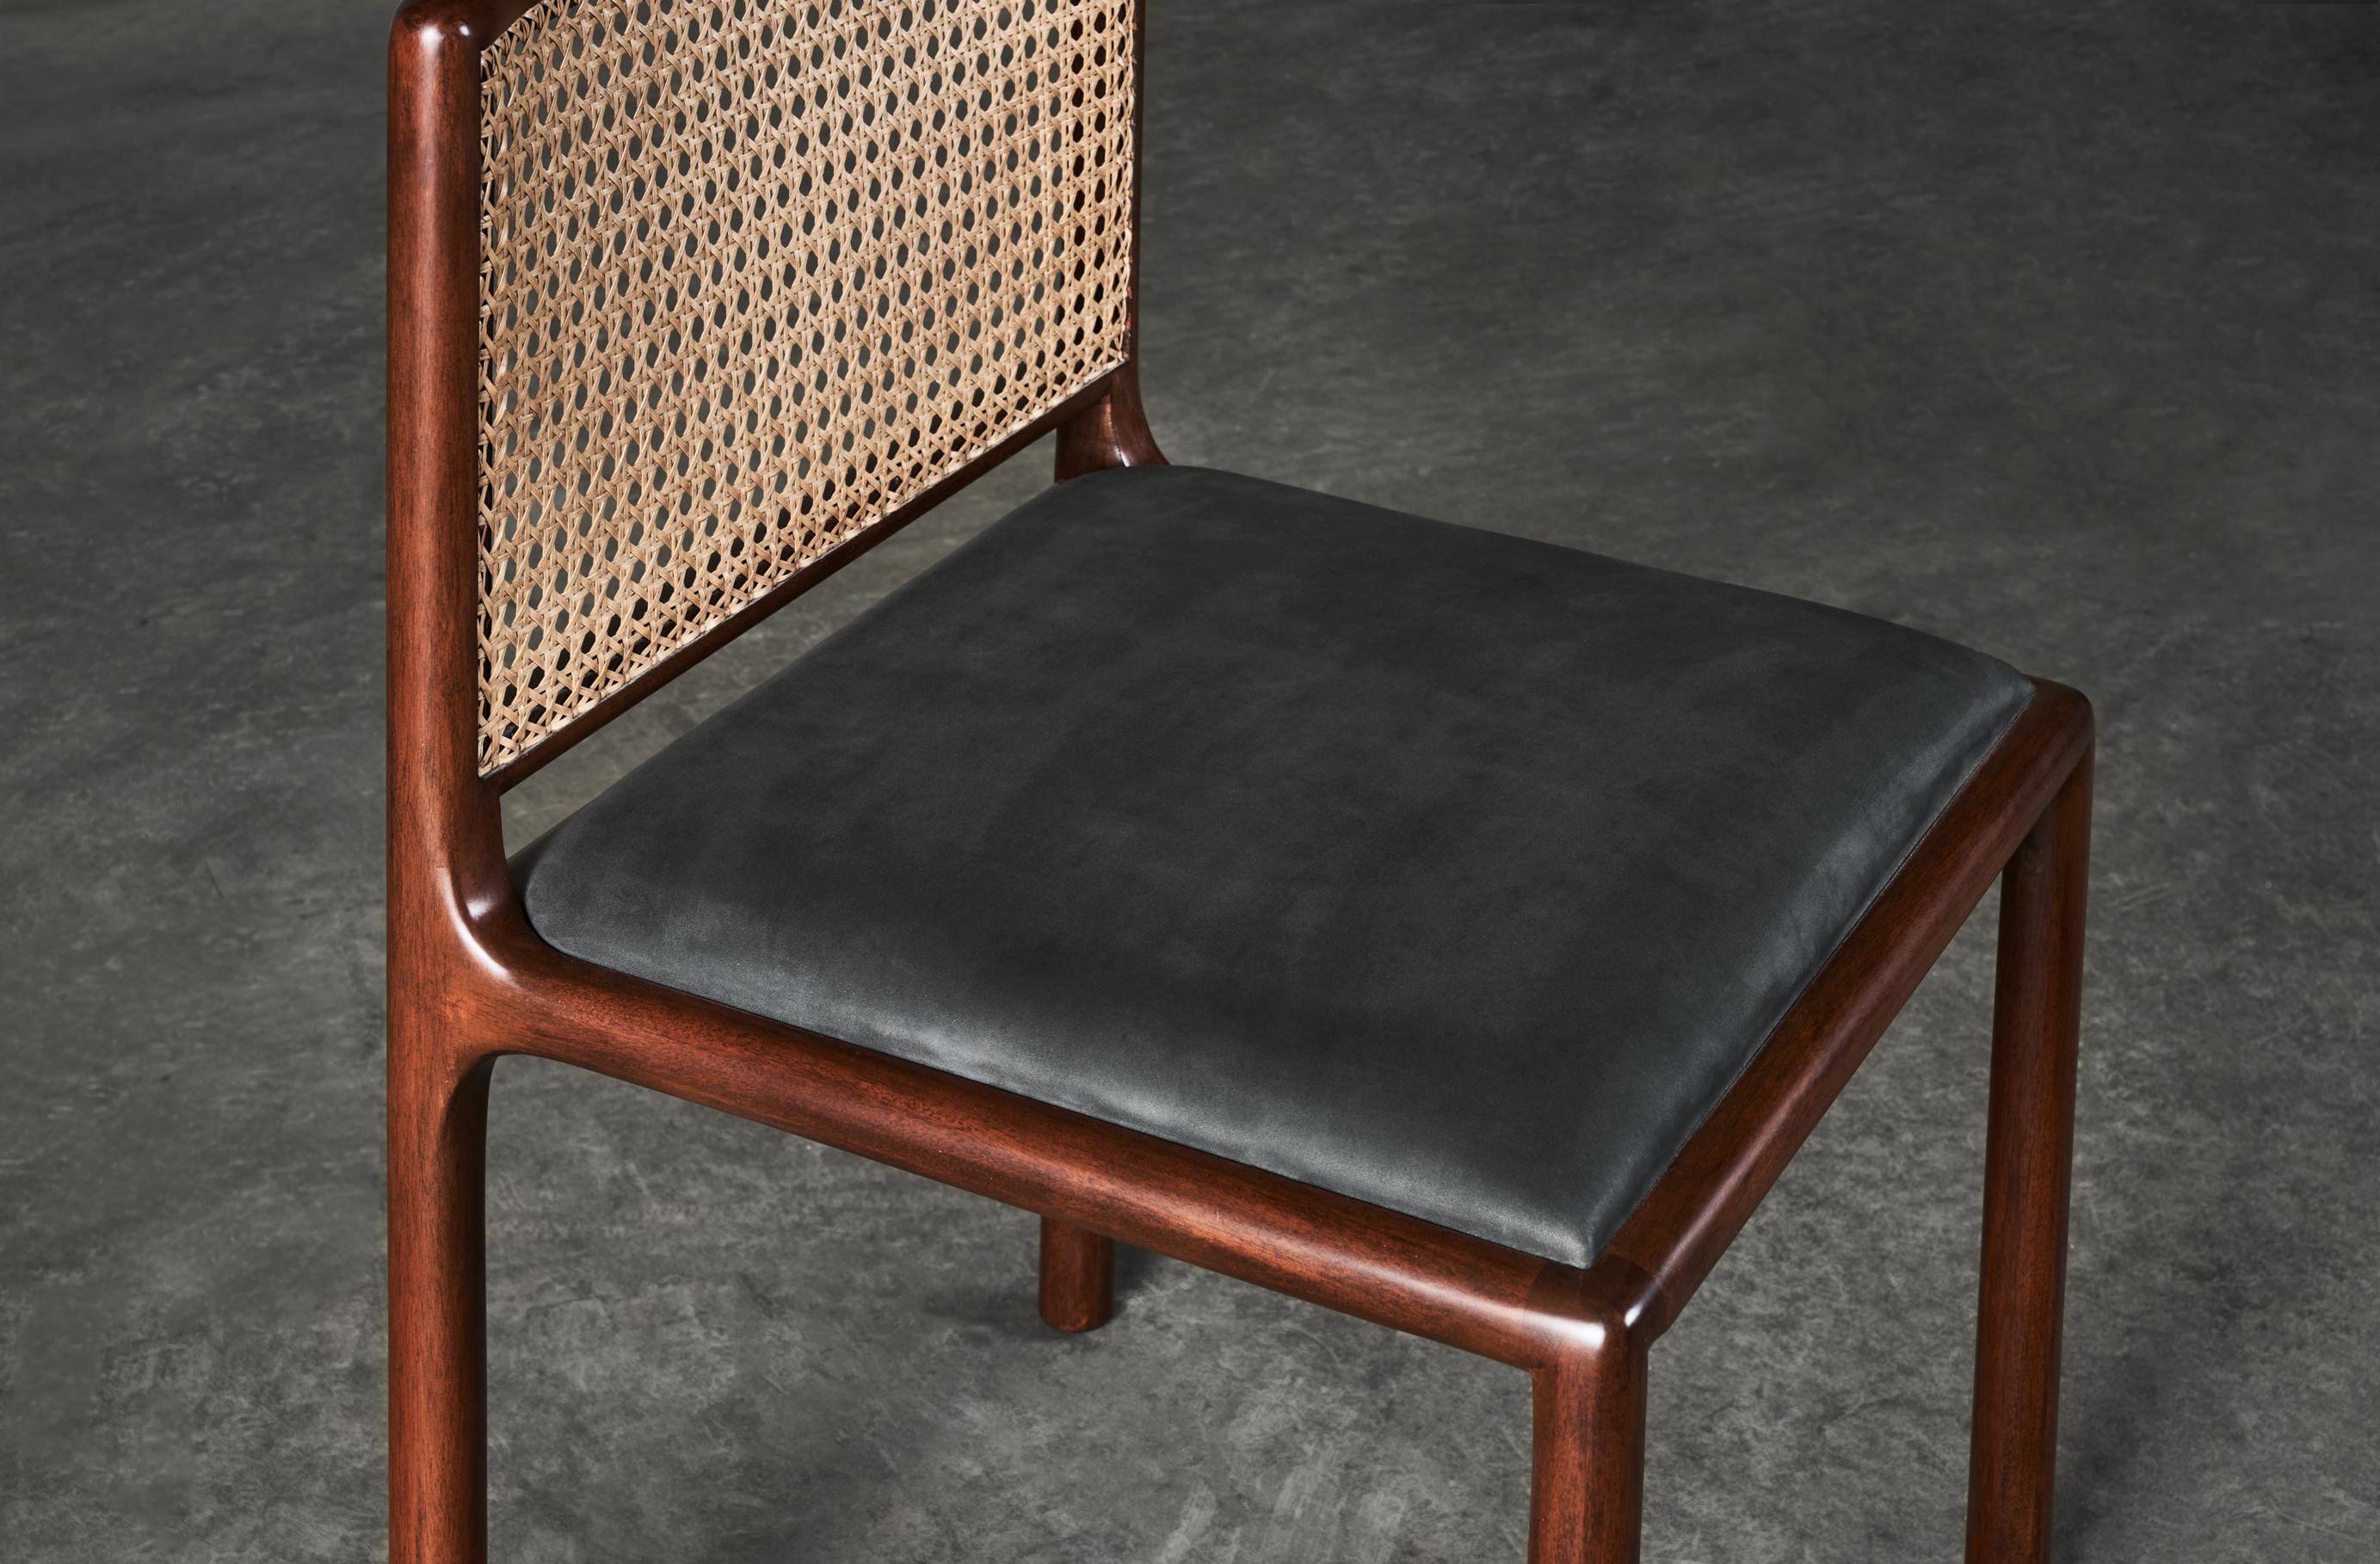 Philippine Scandinavian Mesh Chair Almost Black Leather by Dusty Deco